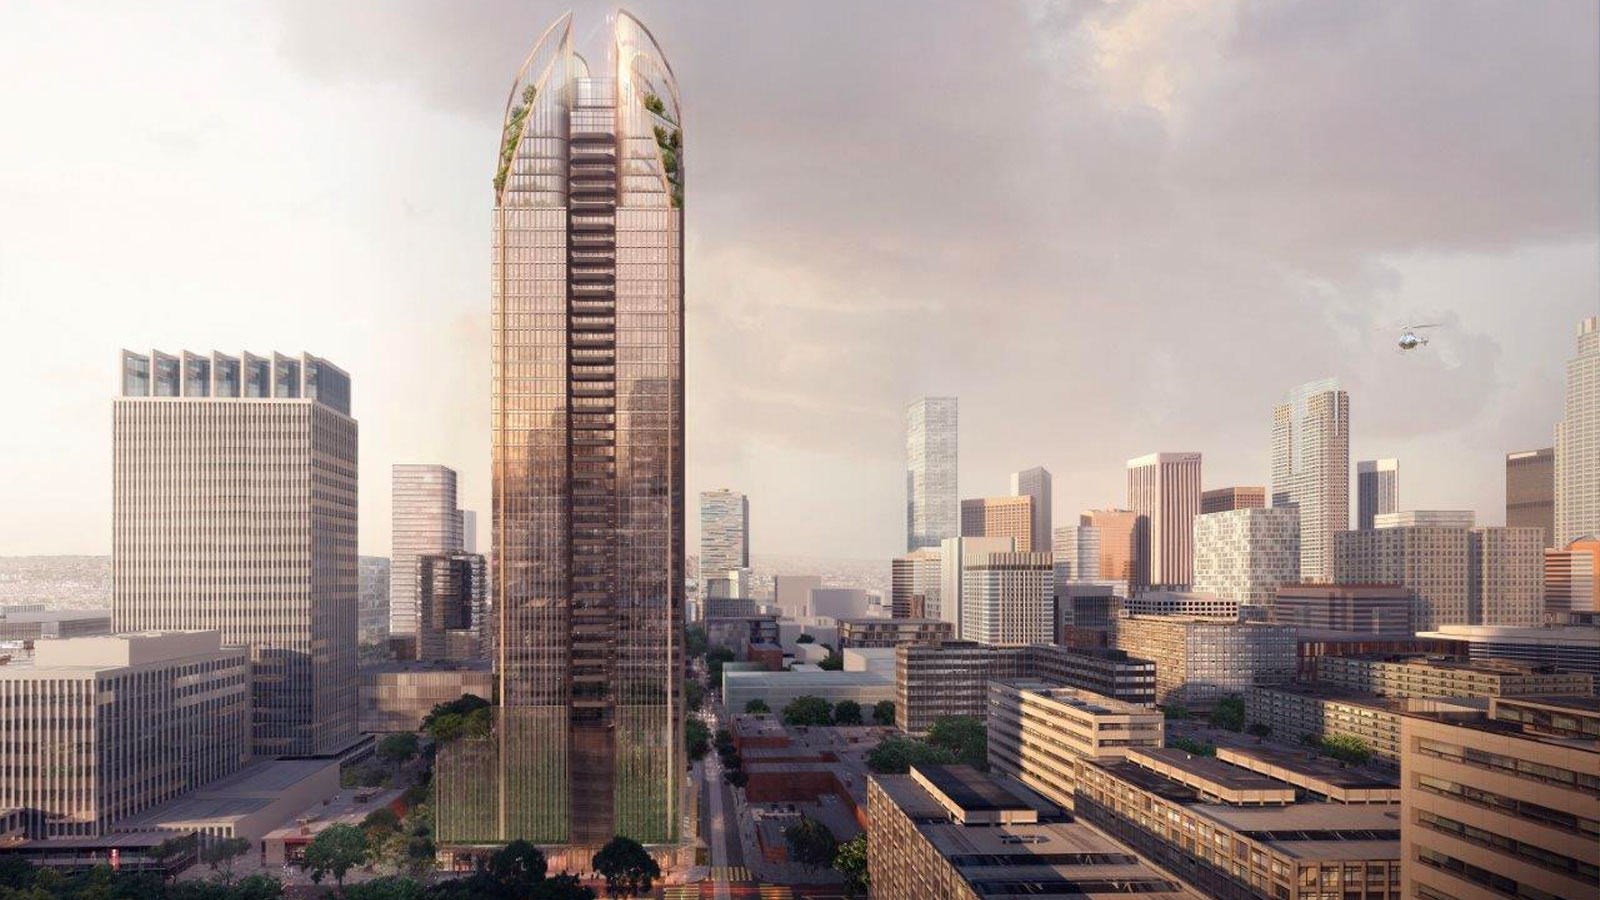 ▲ Sunito plans to continue Crown Group's expansion globally. The developer's 63-storey residential skyscraper in downtown Los Angeles.